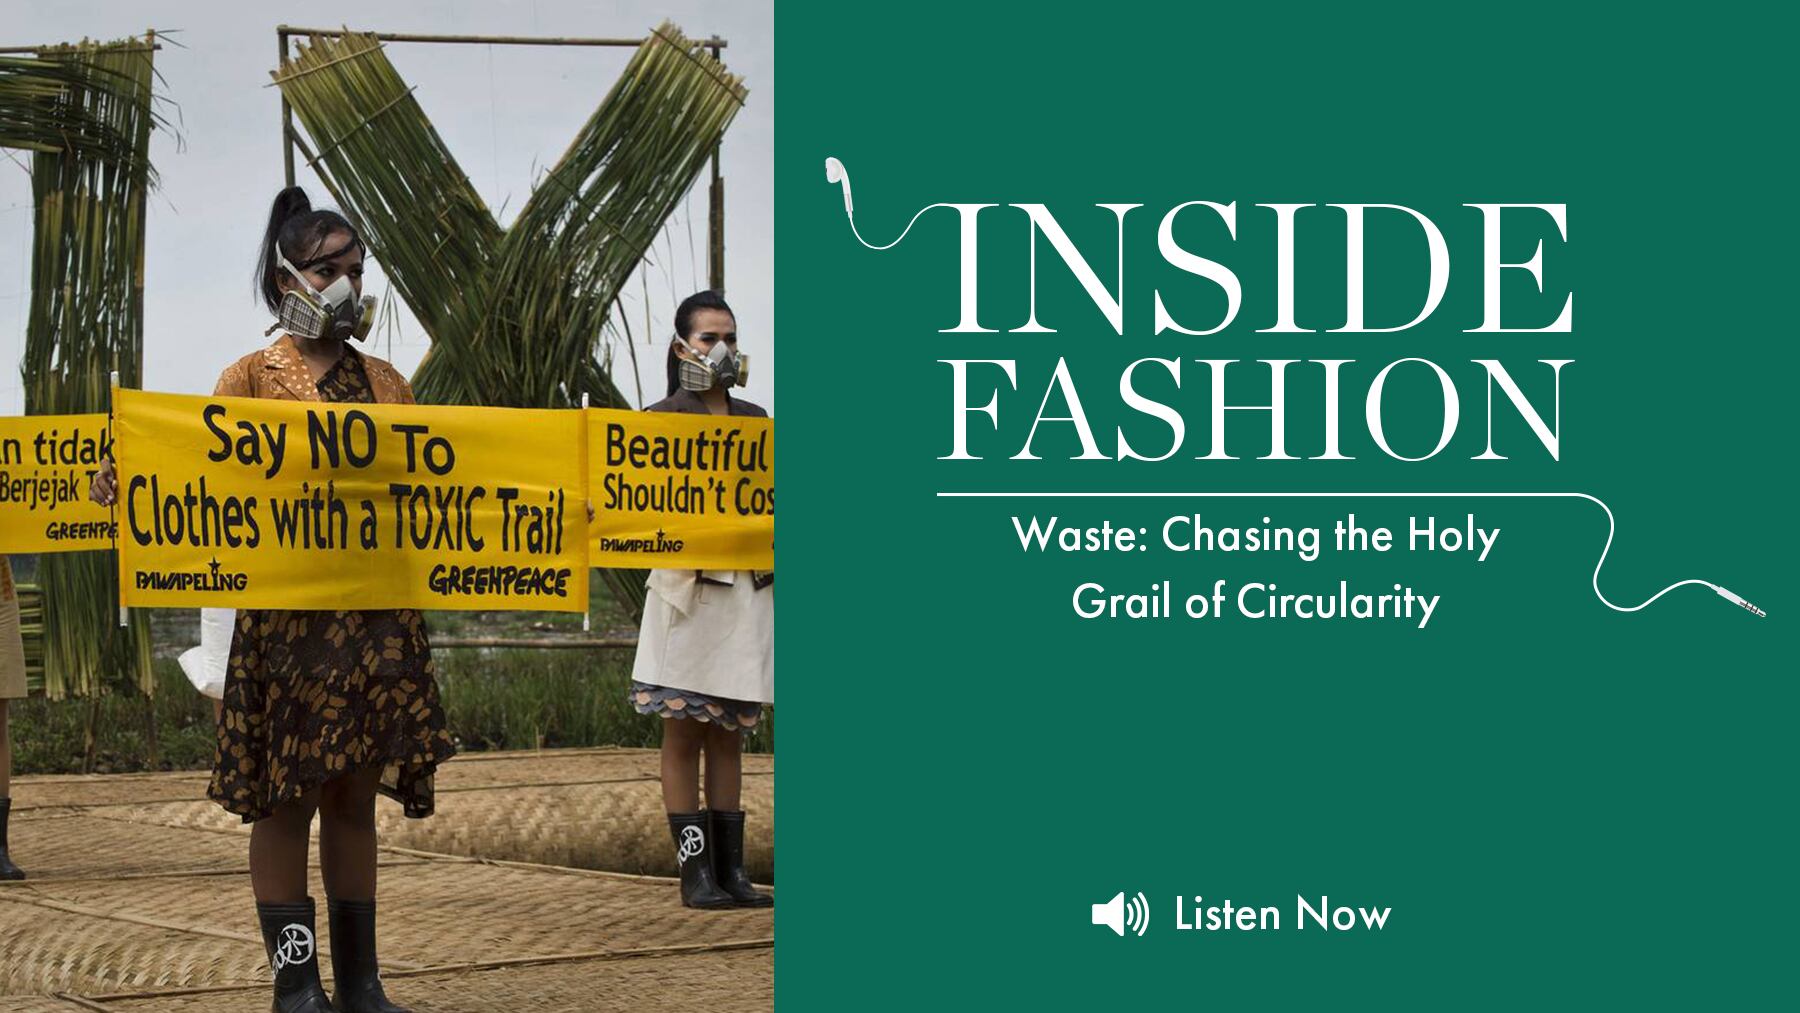 Waste: Chasing the Holy Grail of Circularity